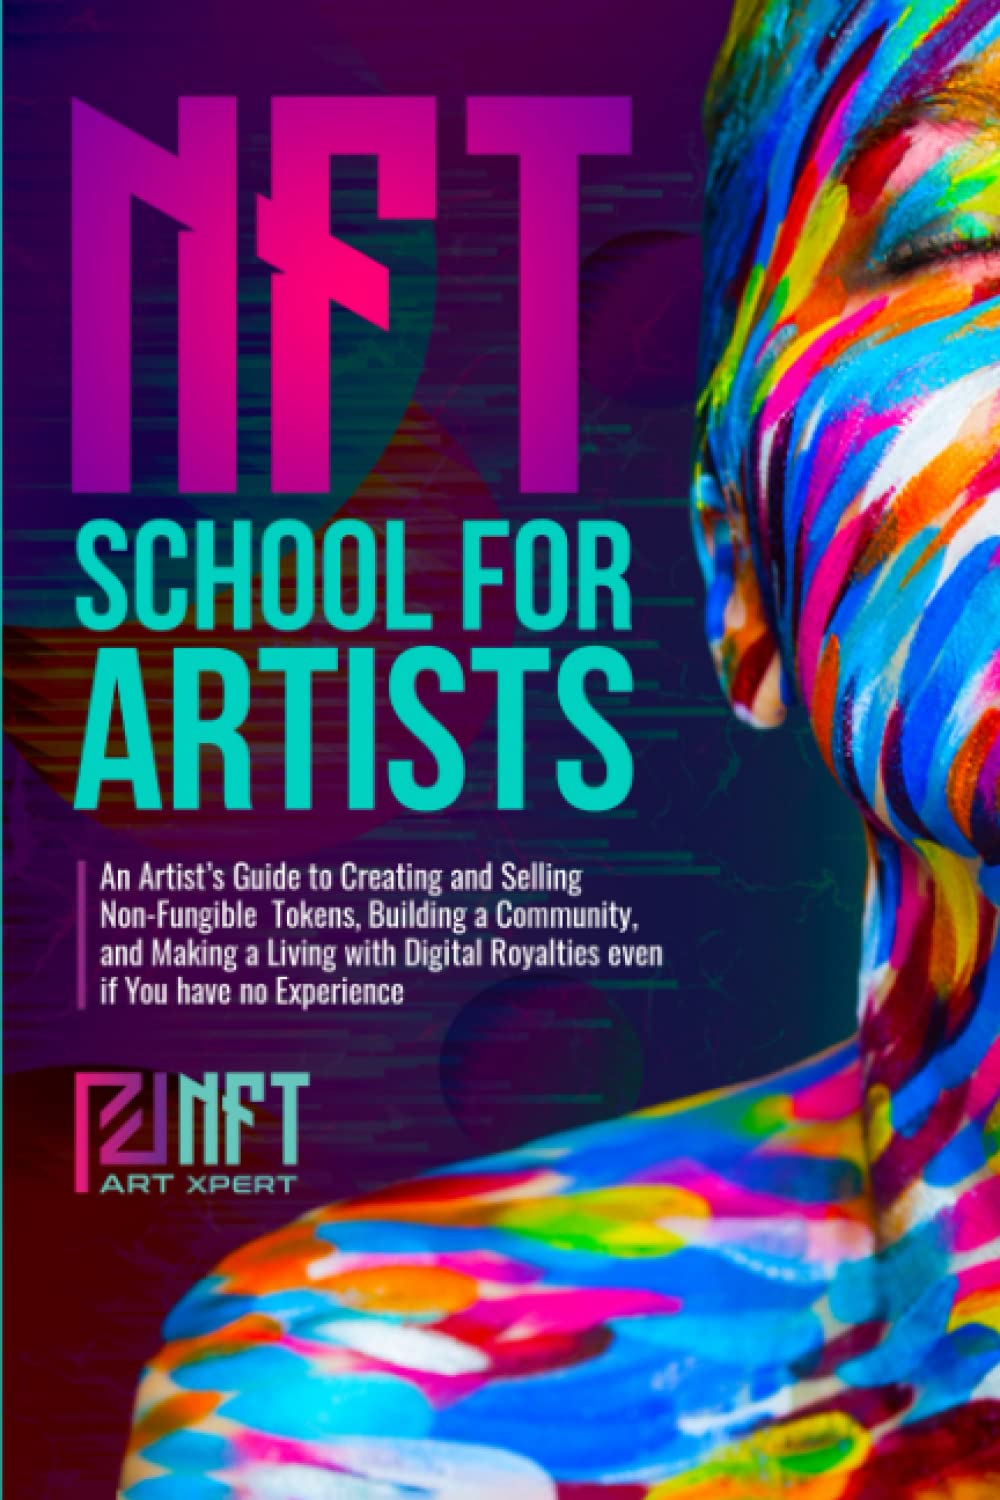 NFT School for Artists: An Artist’s Guide to Creating and Selling Non-Fungible Tokens, Building a Community, and Making a Living with Digital Royalties Even if You Have no Experience